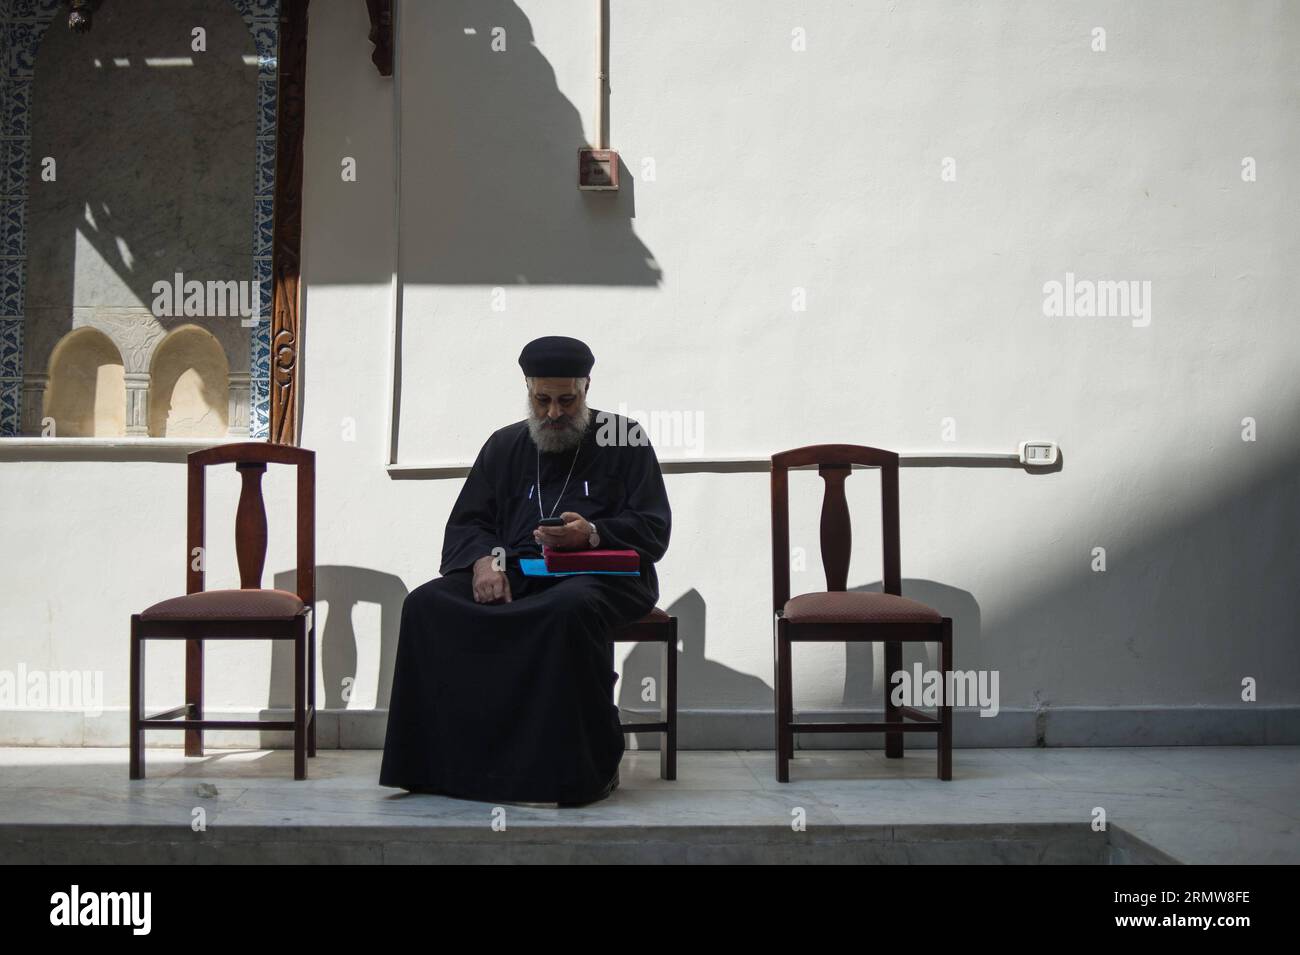 A Coptic priest rests at the hanging Coptic church in Cairo, Egypt, Oct. 11, 2014. The centuries-old church was reopened on Oct. 11 after 16 years of renovation. ) EGYPT-CAIRO-RELIGION-COPTIC CHURCH PanxChaoyue PUBLICATIONxNOTxINxCHN   a Coptic Priest rests AT The Hanging Coptic Church in Cairo Egypt OCT 11 2014 The centuries Old Church what reopened ON OCT 11 After 16 Years of Renovation Egypt Cairo Religion Coptic Church  PUBLICATIONxNOTxINxCHN Stock Photo